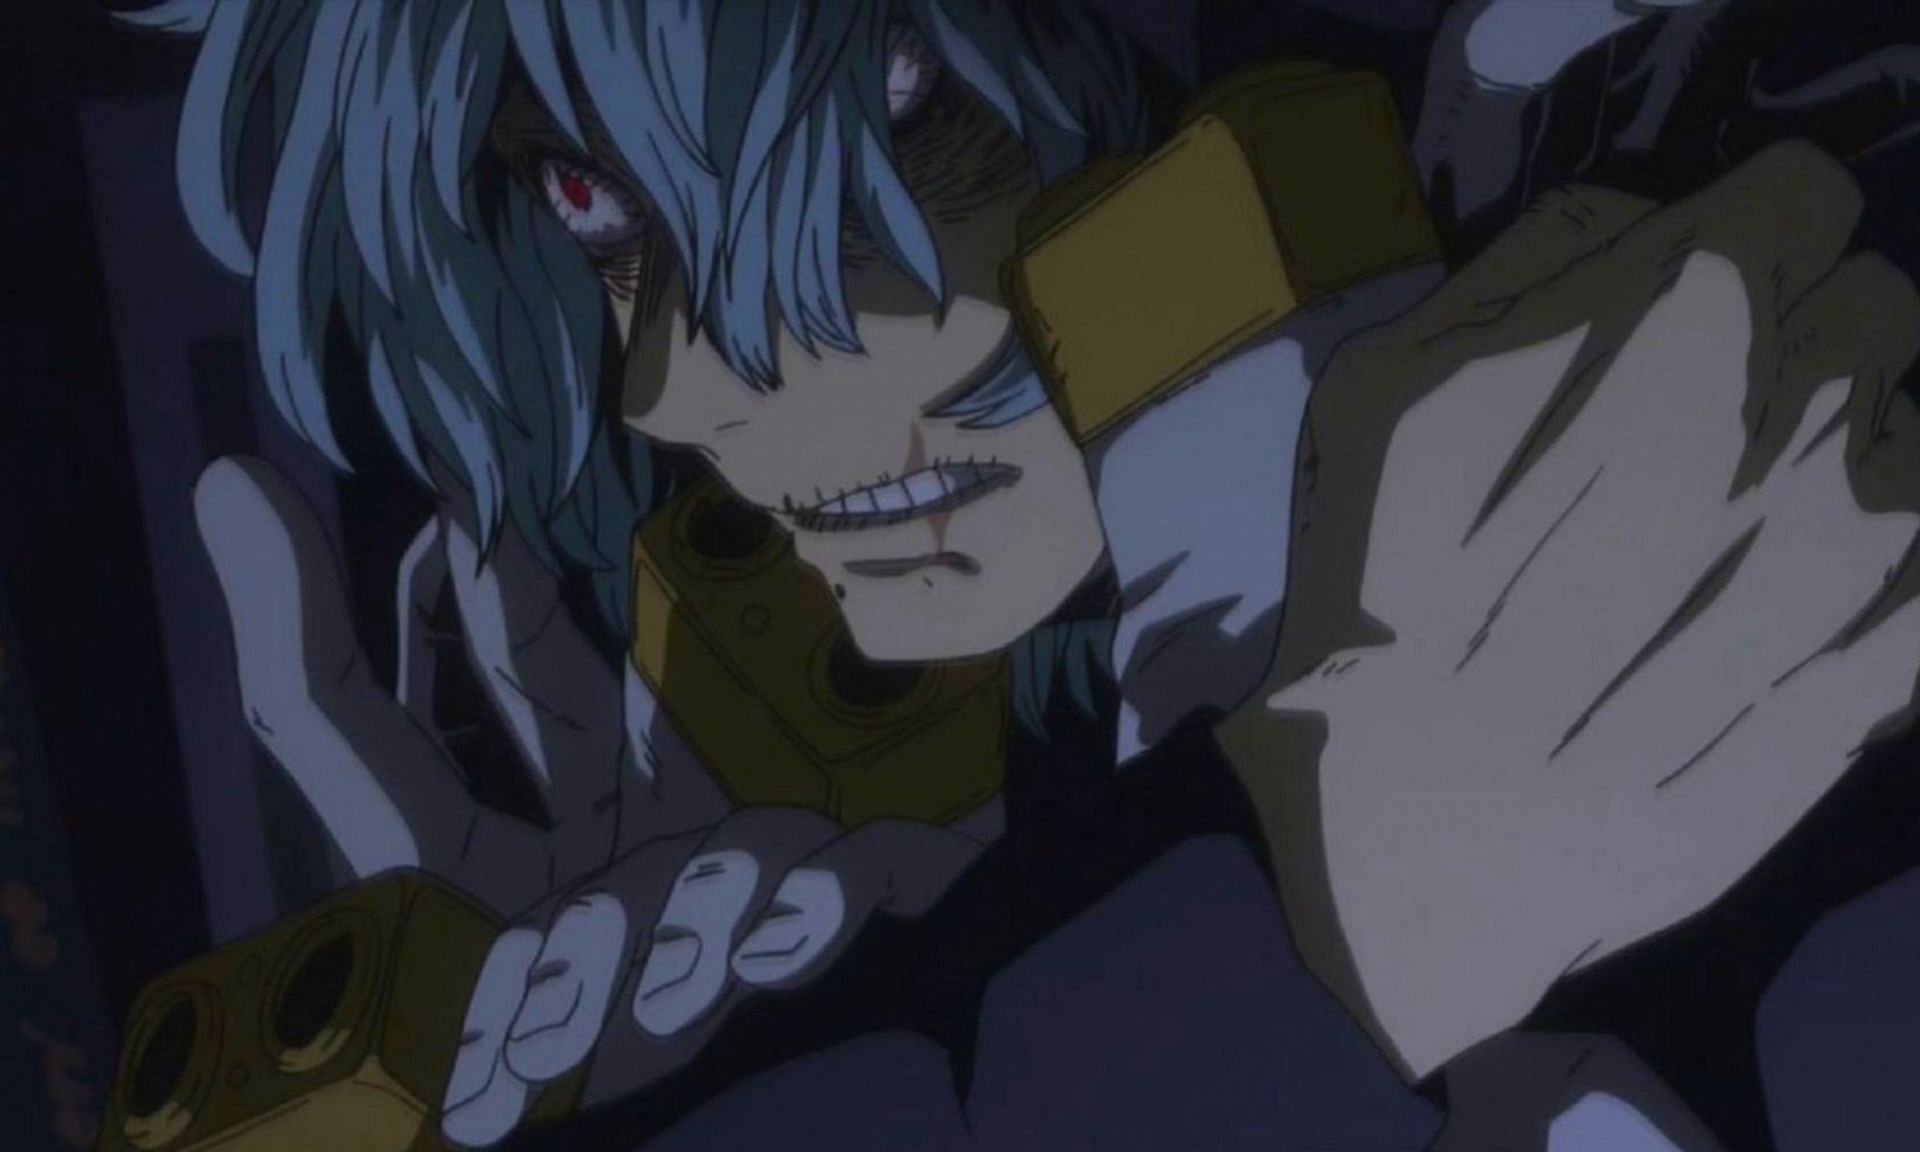 Shigaraki has reached his apex form in the final battle